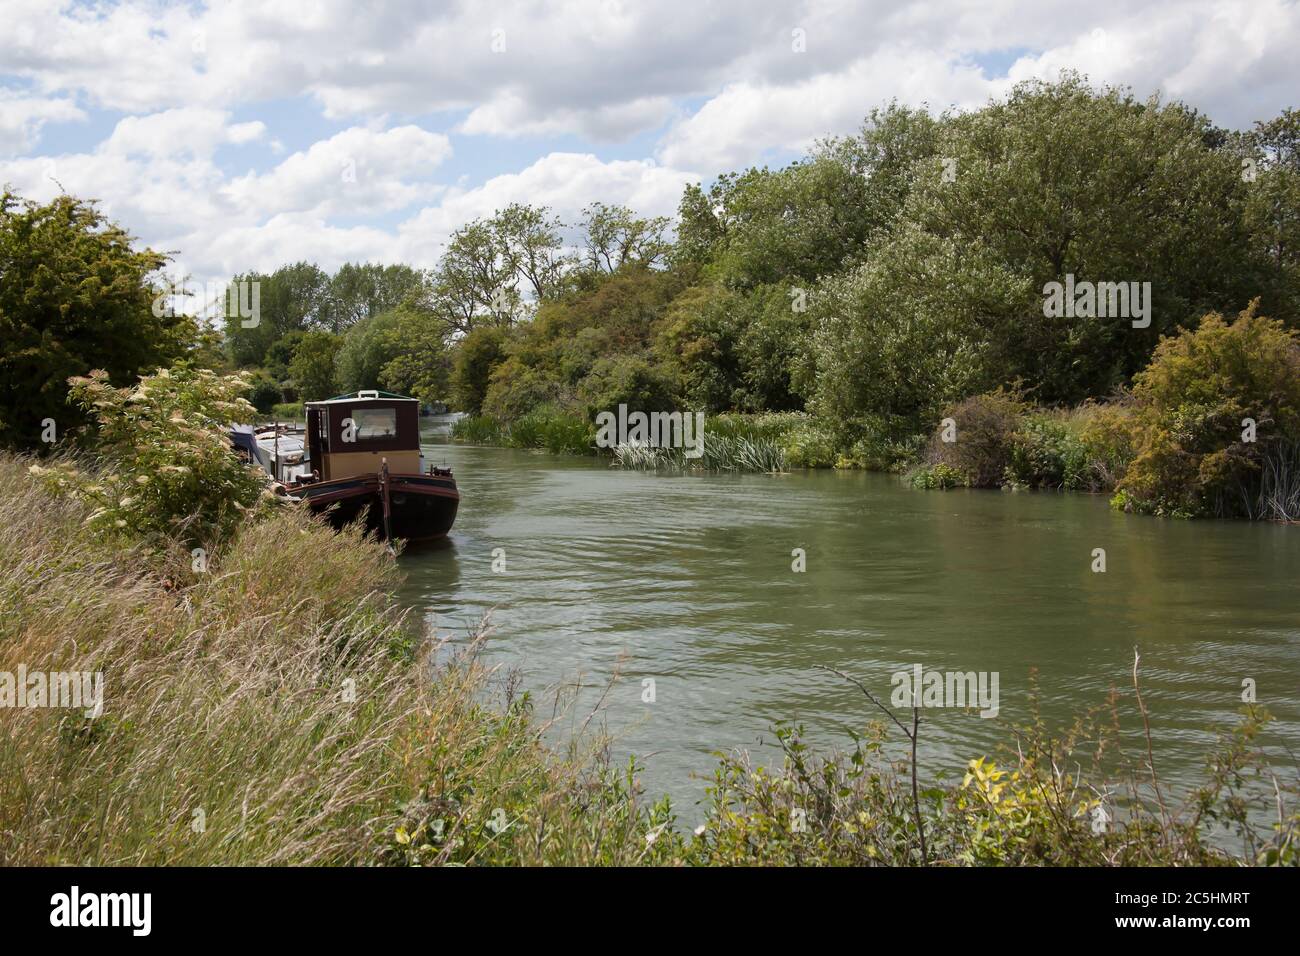 Views of The River Thames near Farmoor in Oxfordshire in the UK Stock Photo